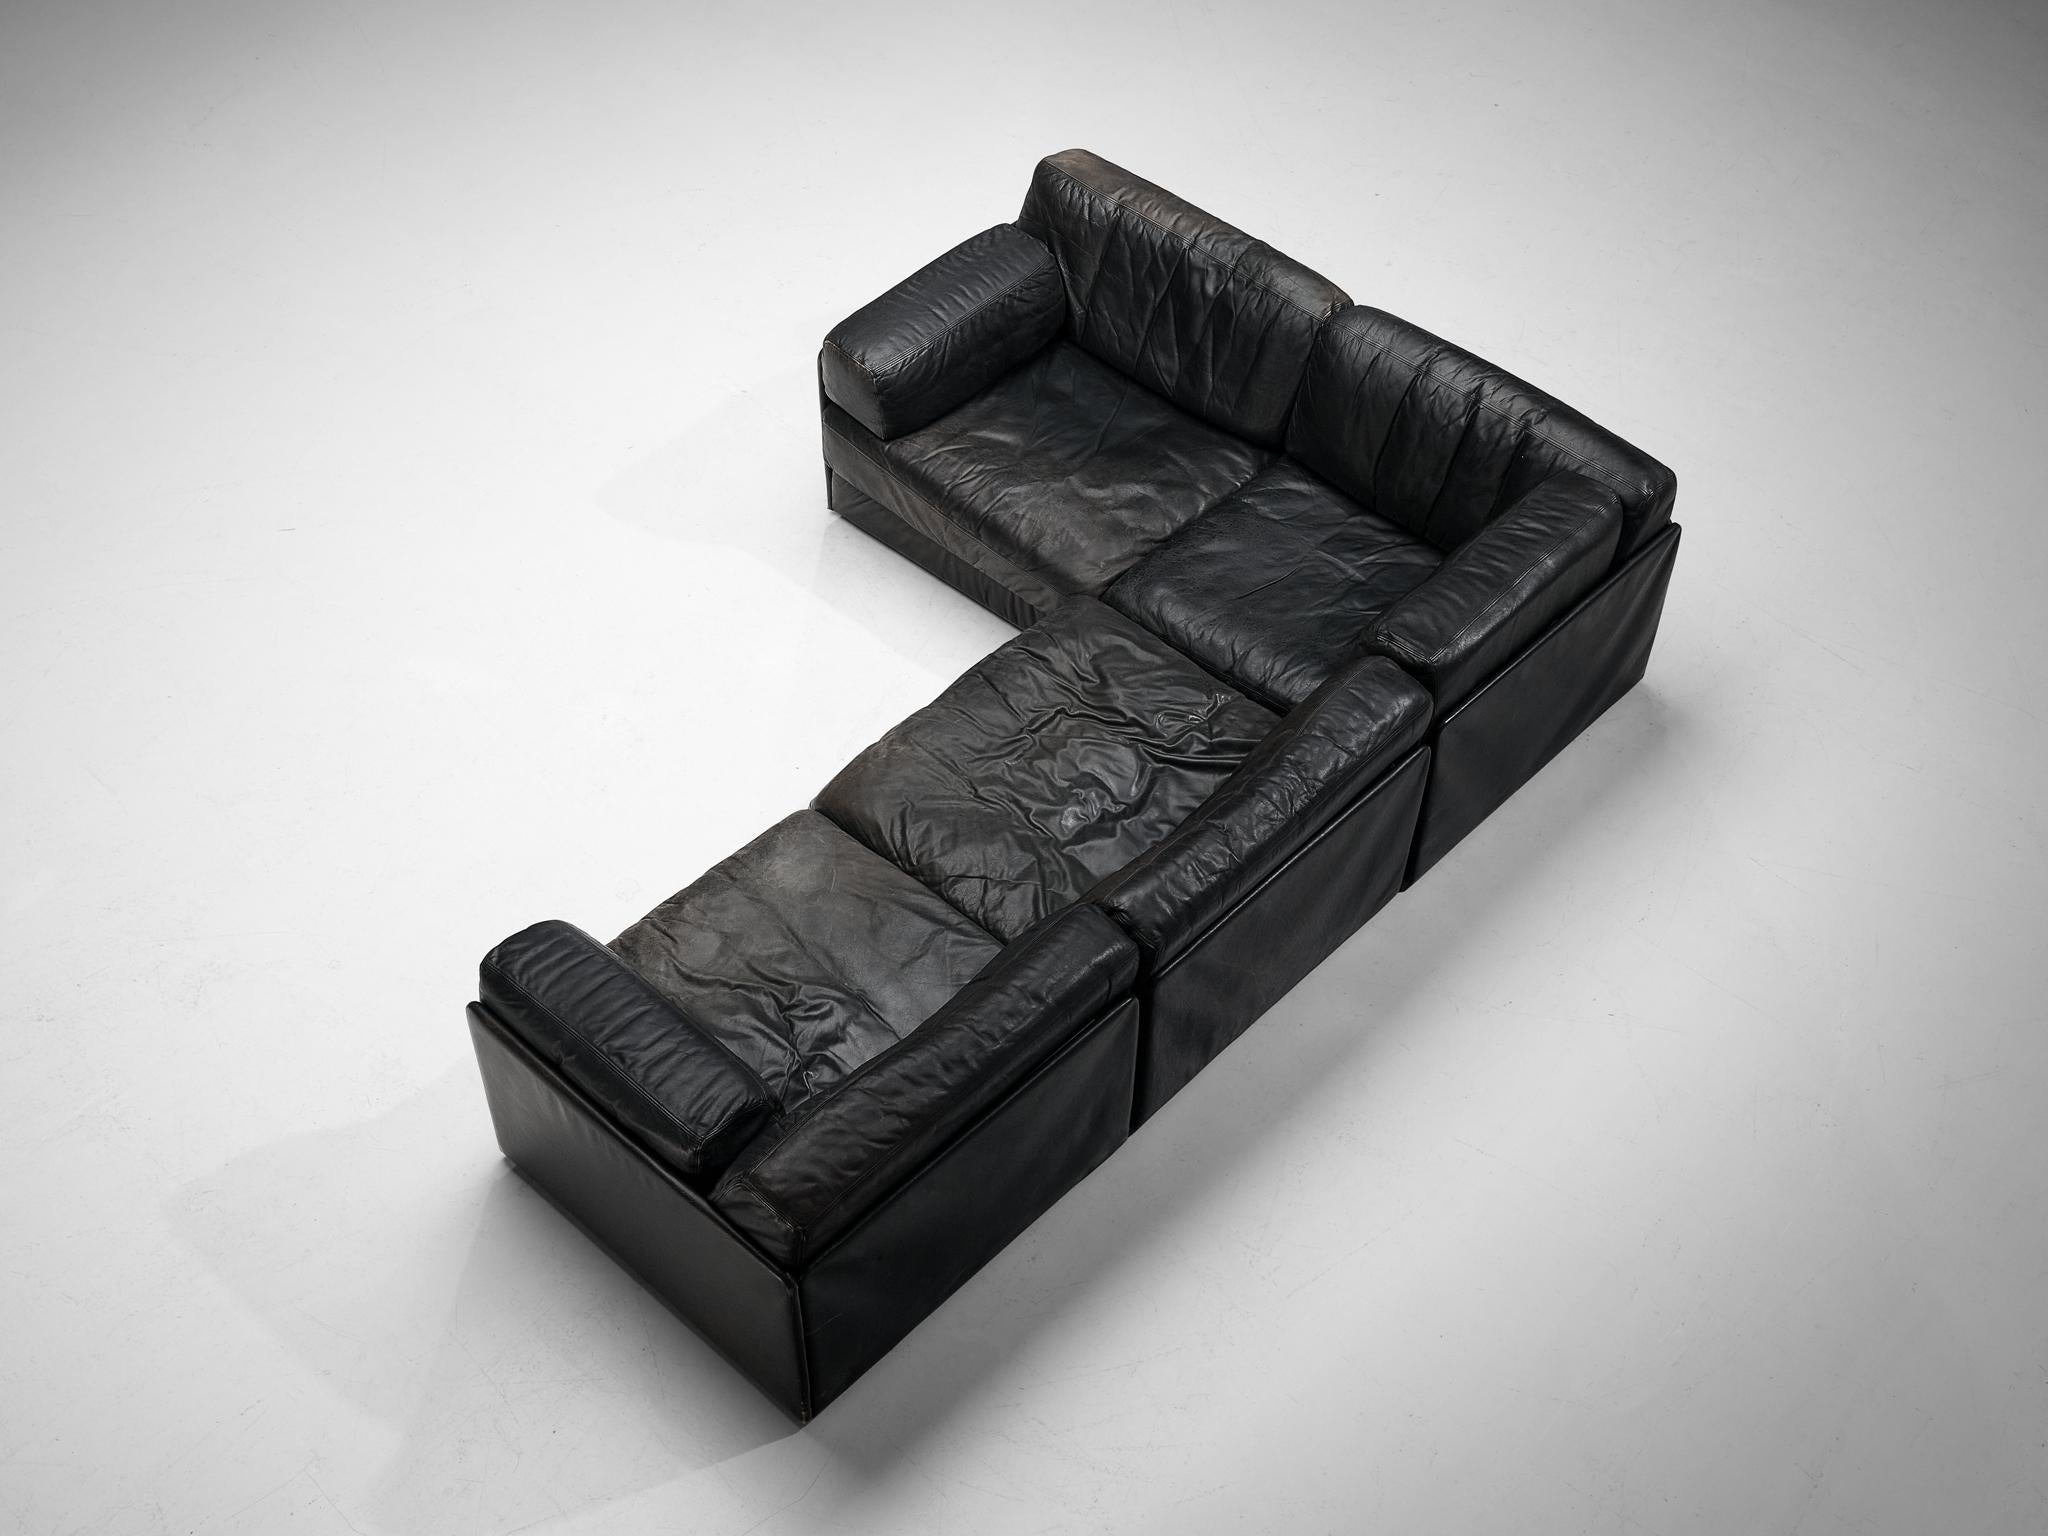 De Sede Sectional Sofa ‘DS-76’ in Black Leather